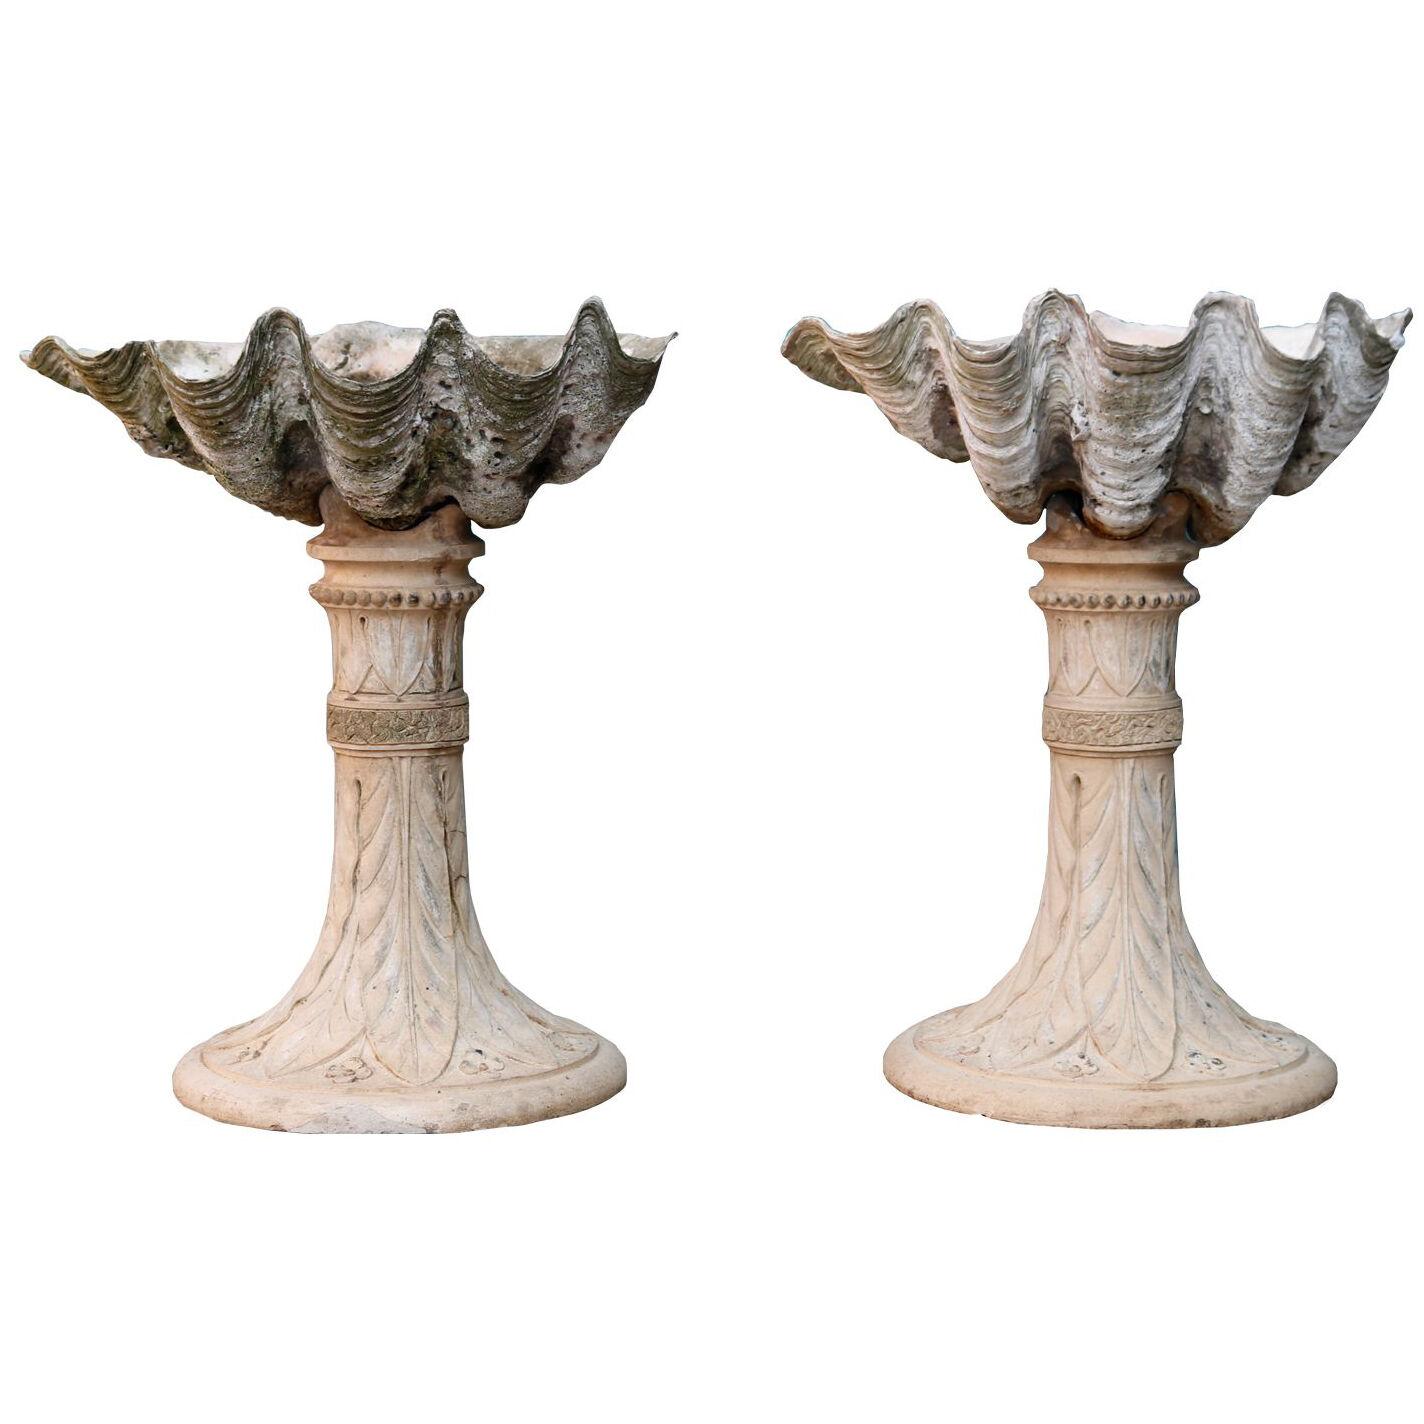 Pair of Victorian Clam Shell Planters or Fountains